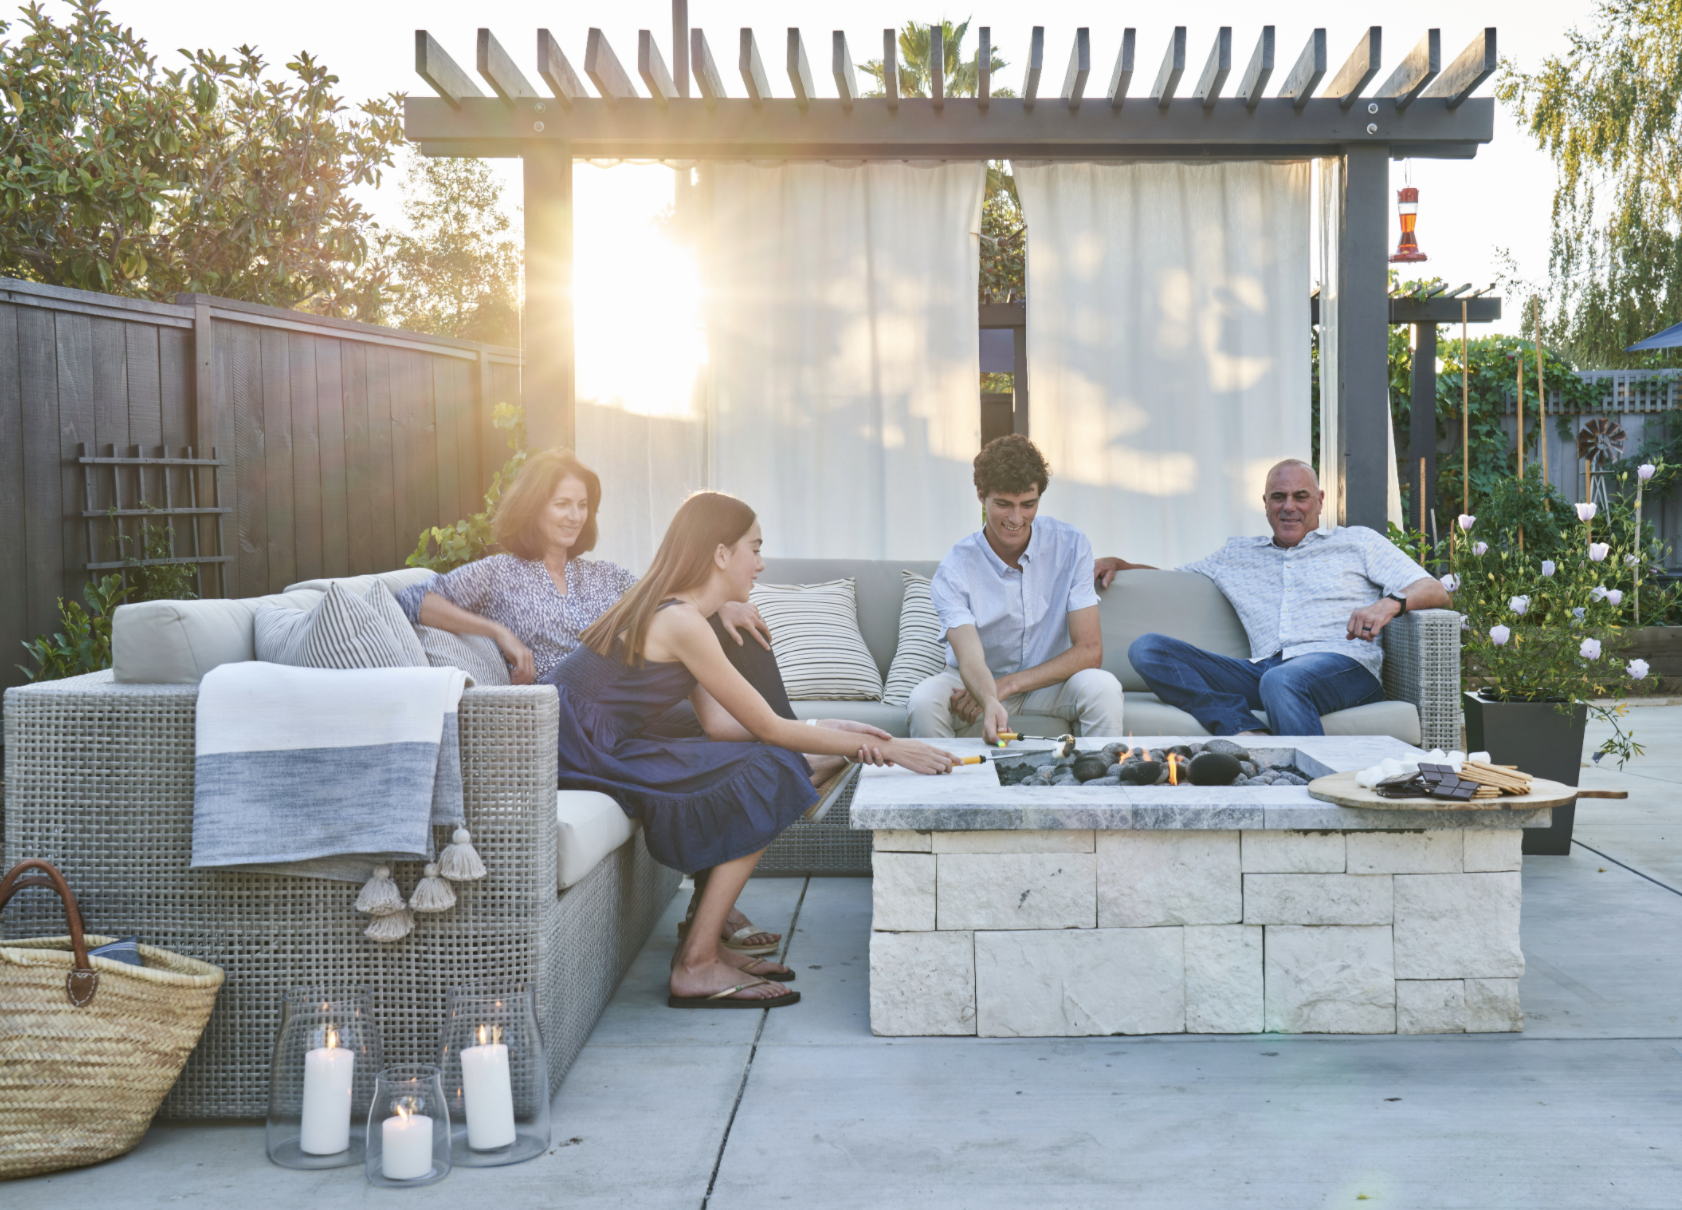 An outdoor fire pit and couches makes this outdoor living room, by Yardzen, the favorite family hang out.